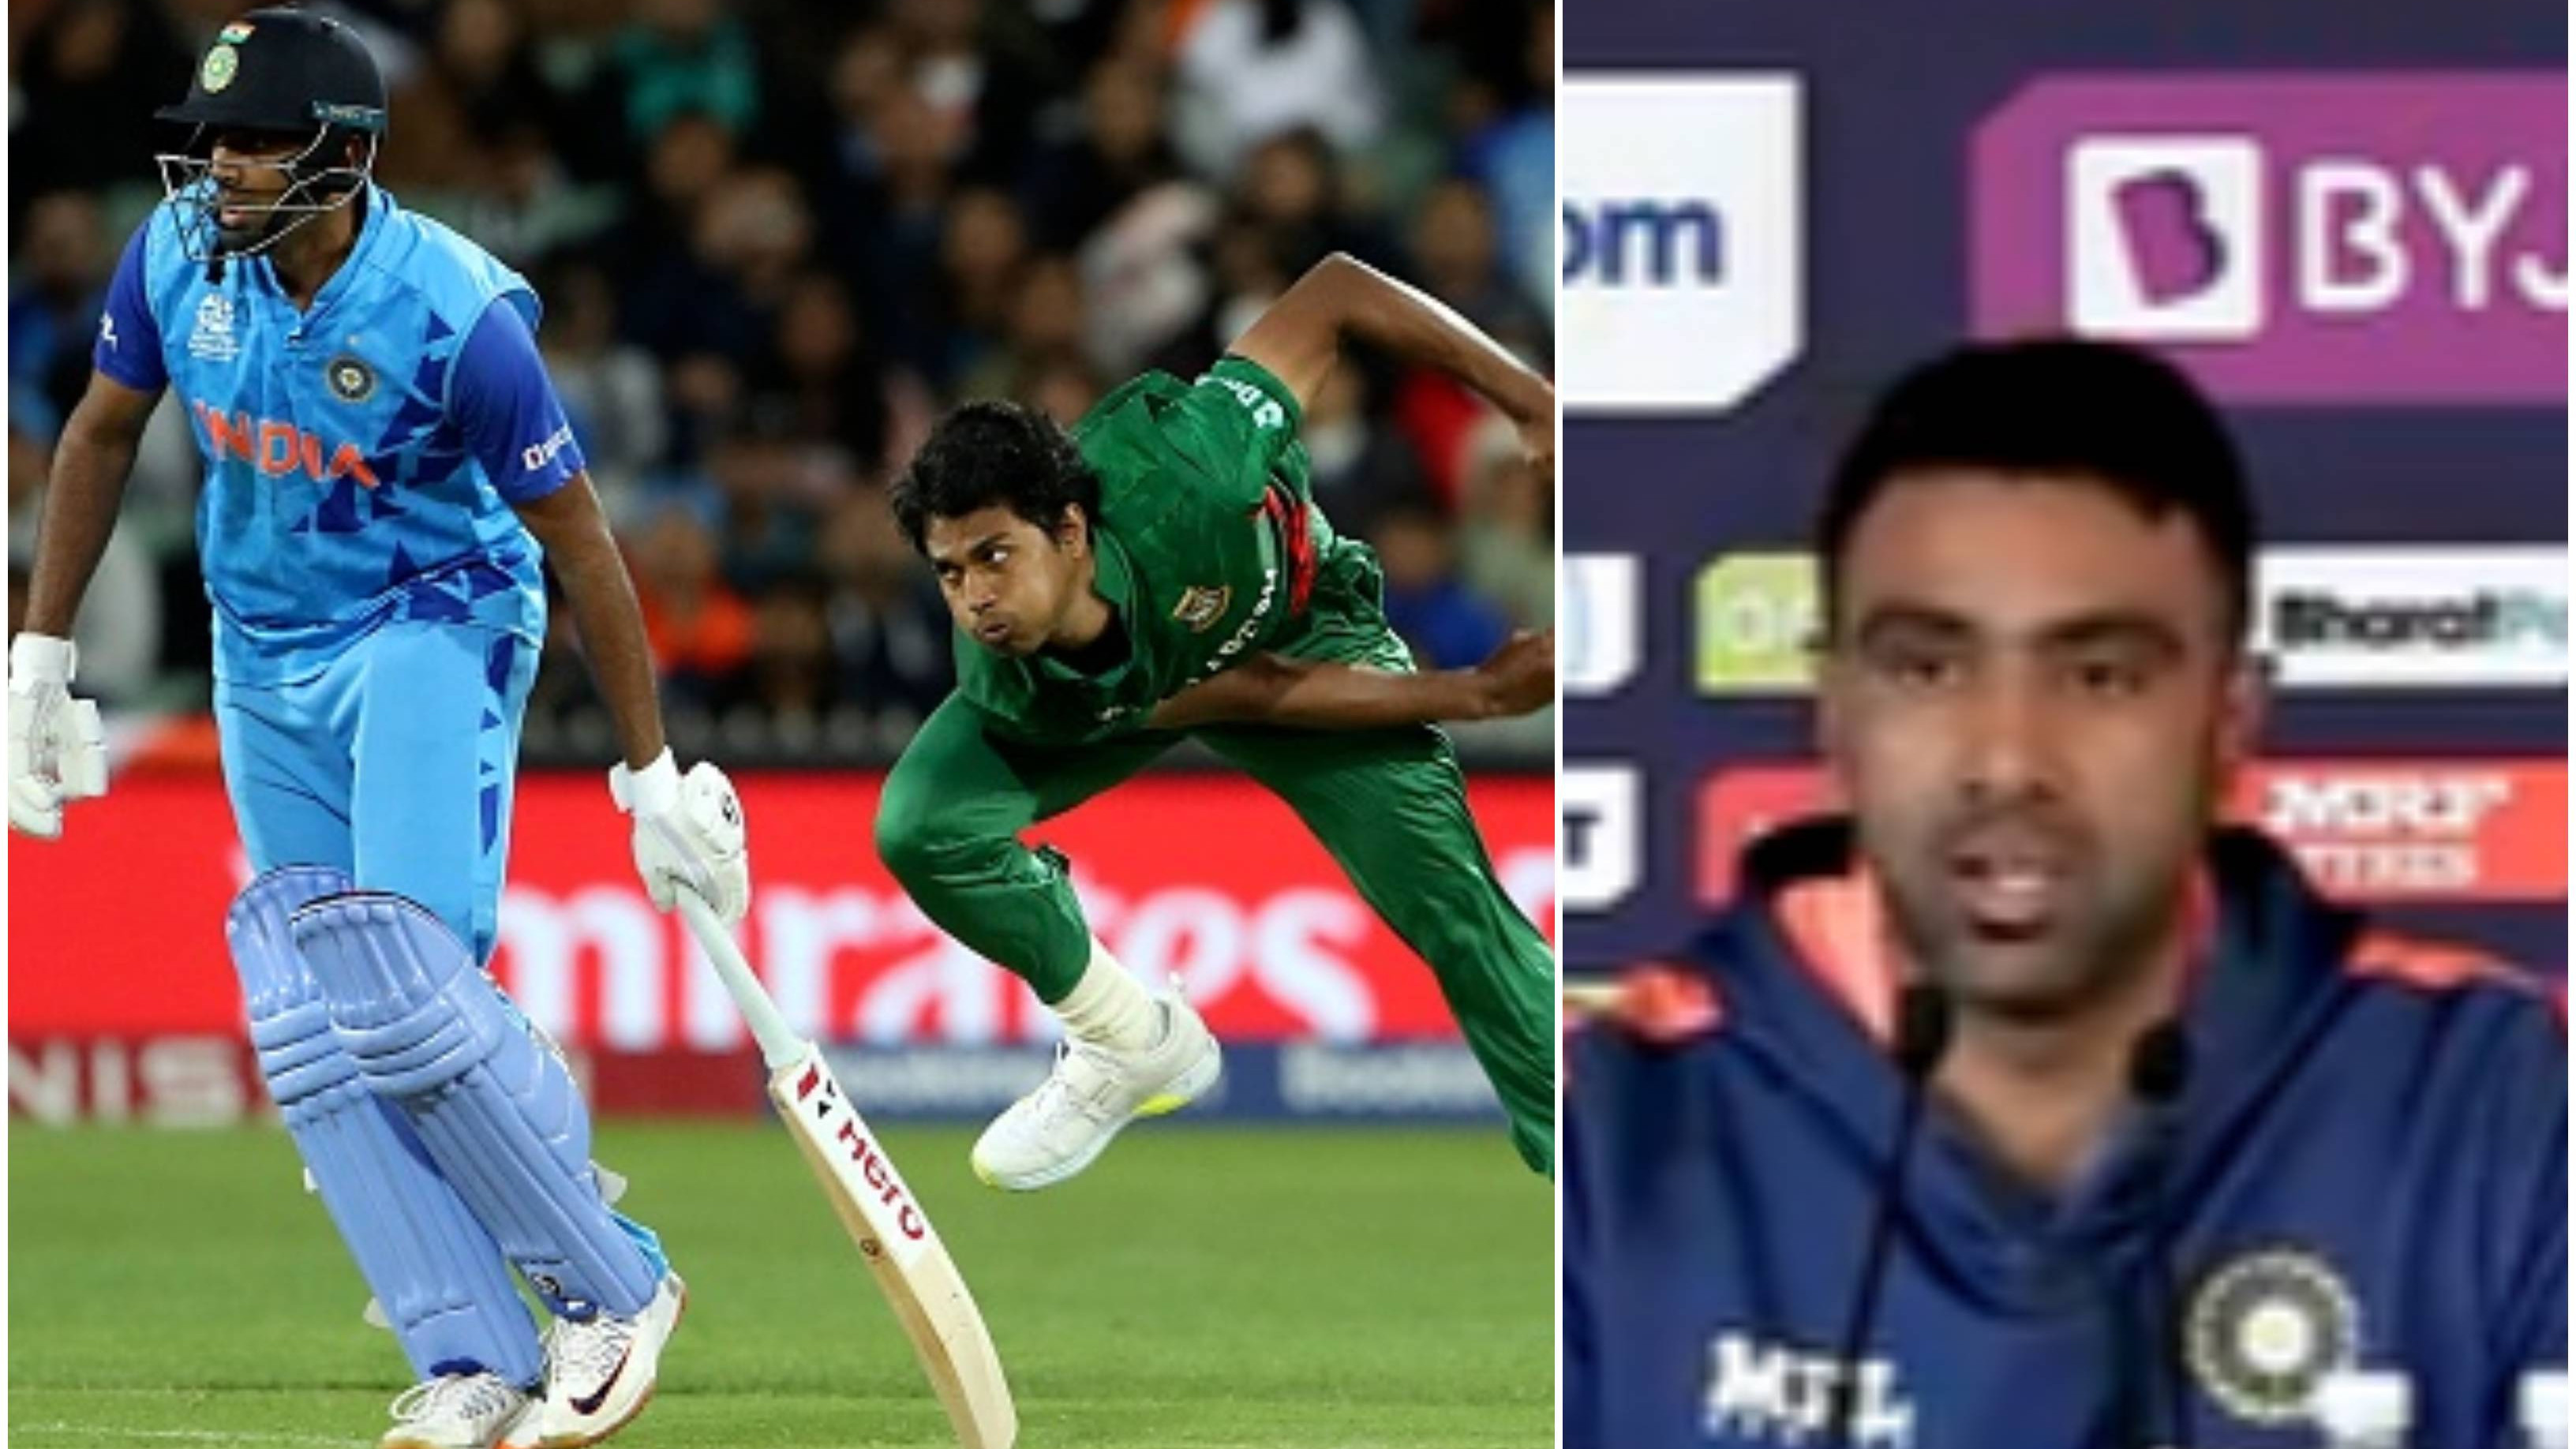 T20 World Cup 2022: “It’s not like I can’t get out like that,” Ashwin reiterates he sees nothing wrong in run-out at non-striker’s end